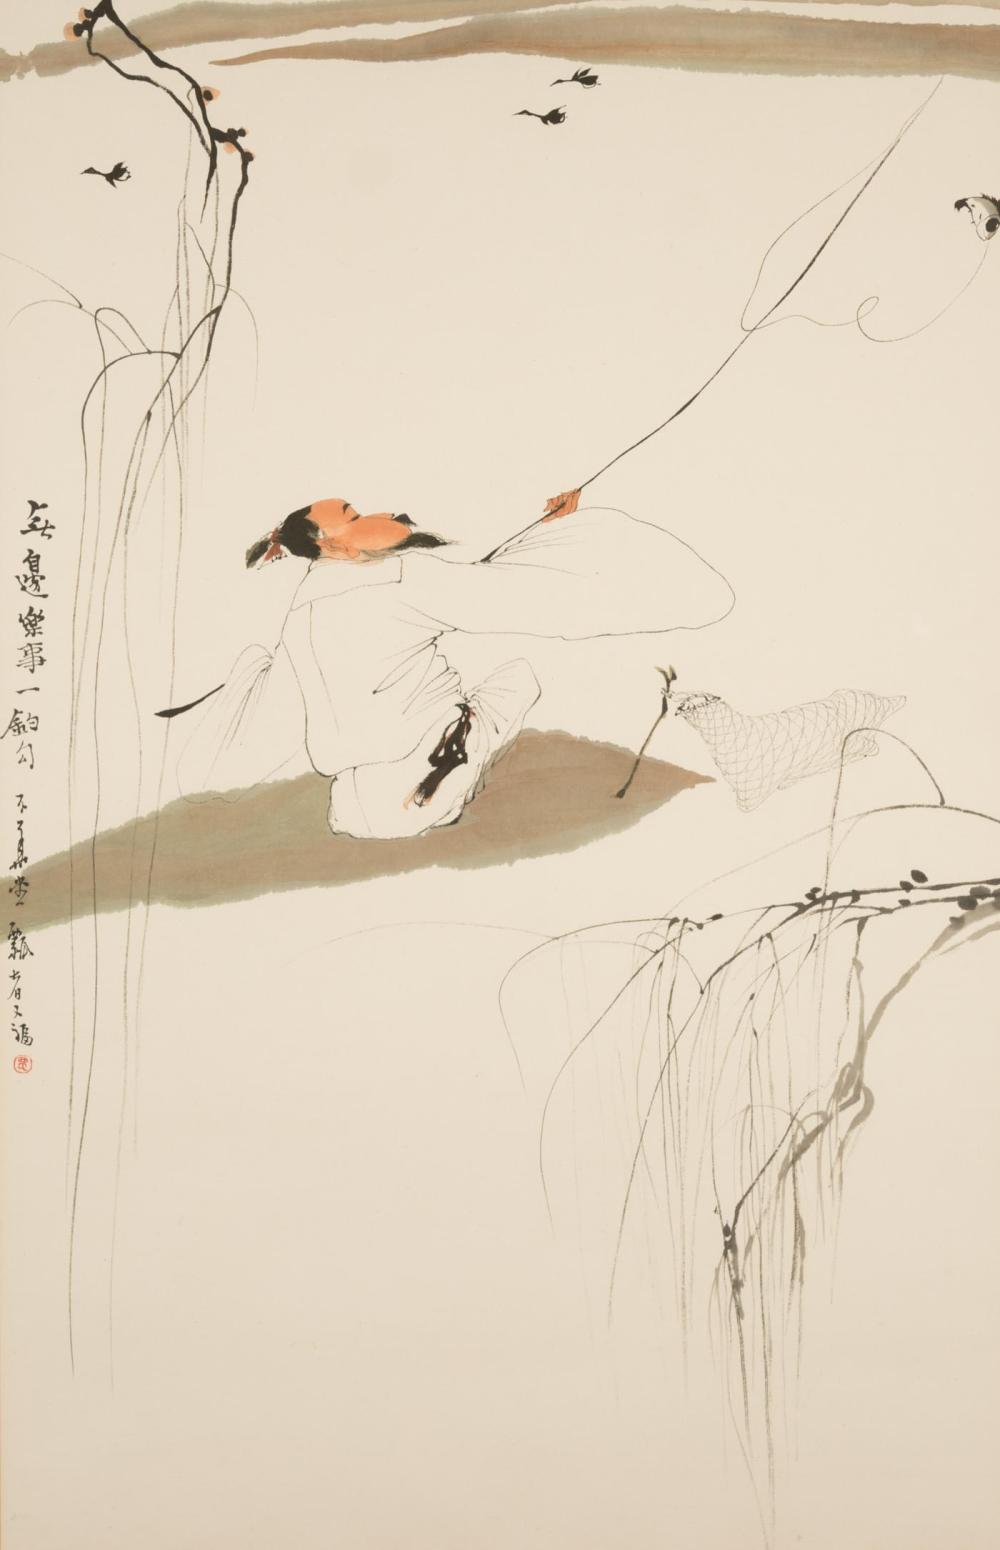 YOUFU JIA INK AND WATERCOLOR ON